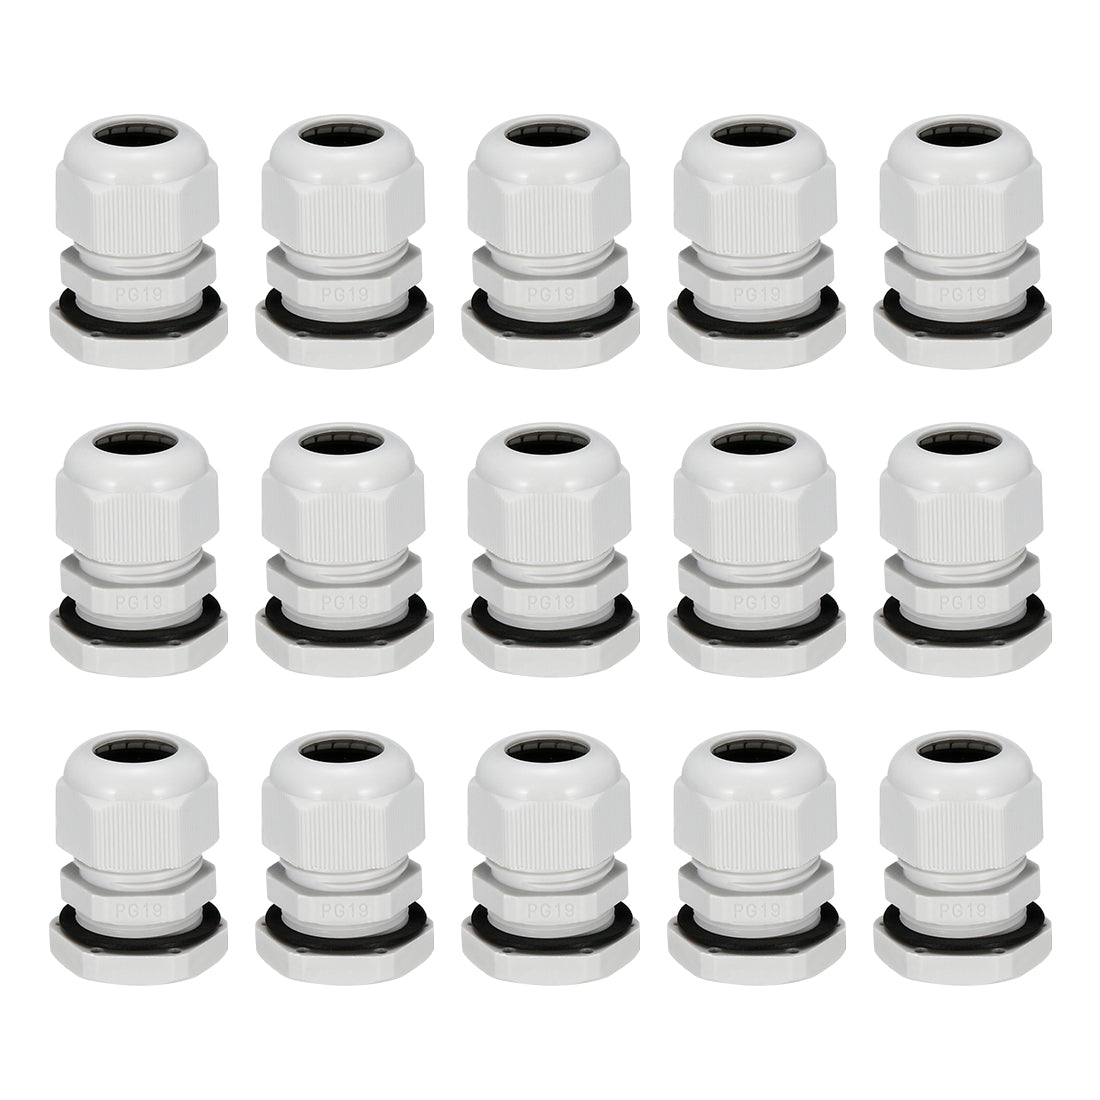 uxcell Uxcell 15Pcs PG19 Cable Gland Waterproof Plastic Joint Adjustable Locknut White for 12mm-15mm Dia Cable Wire